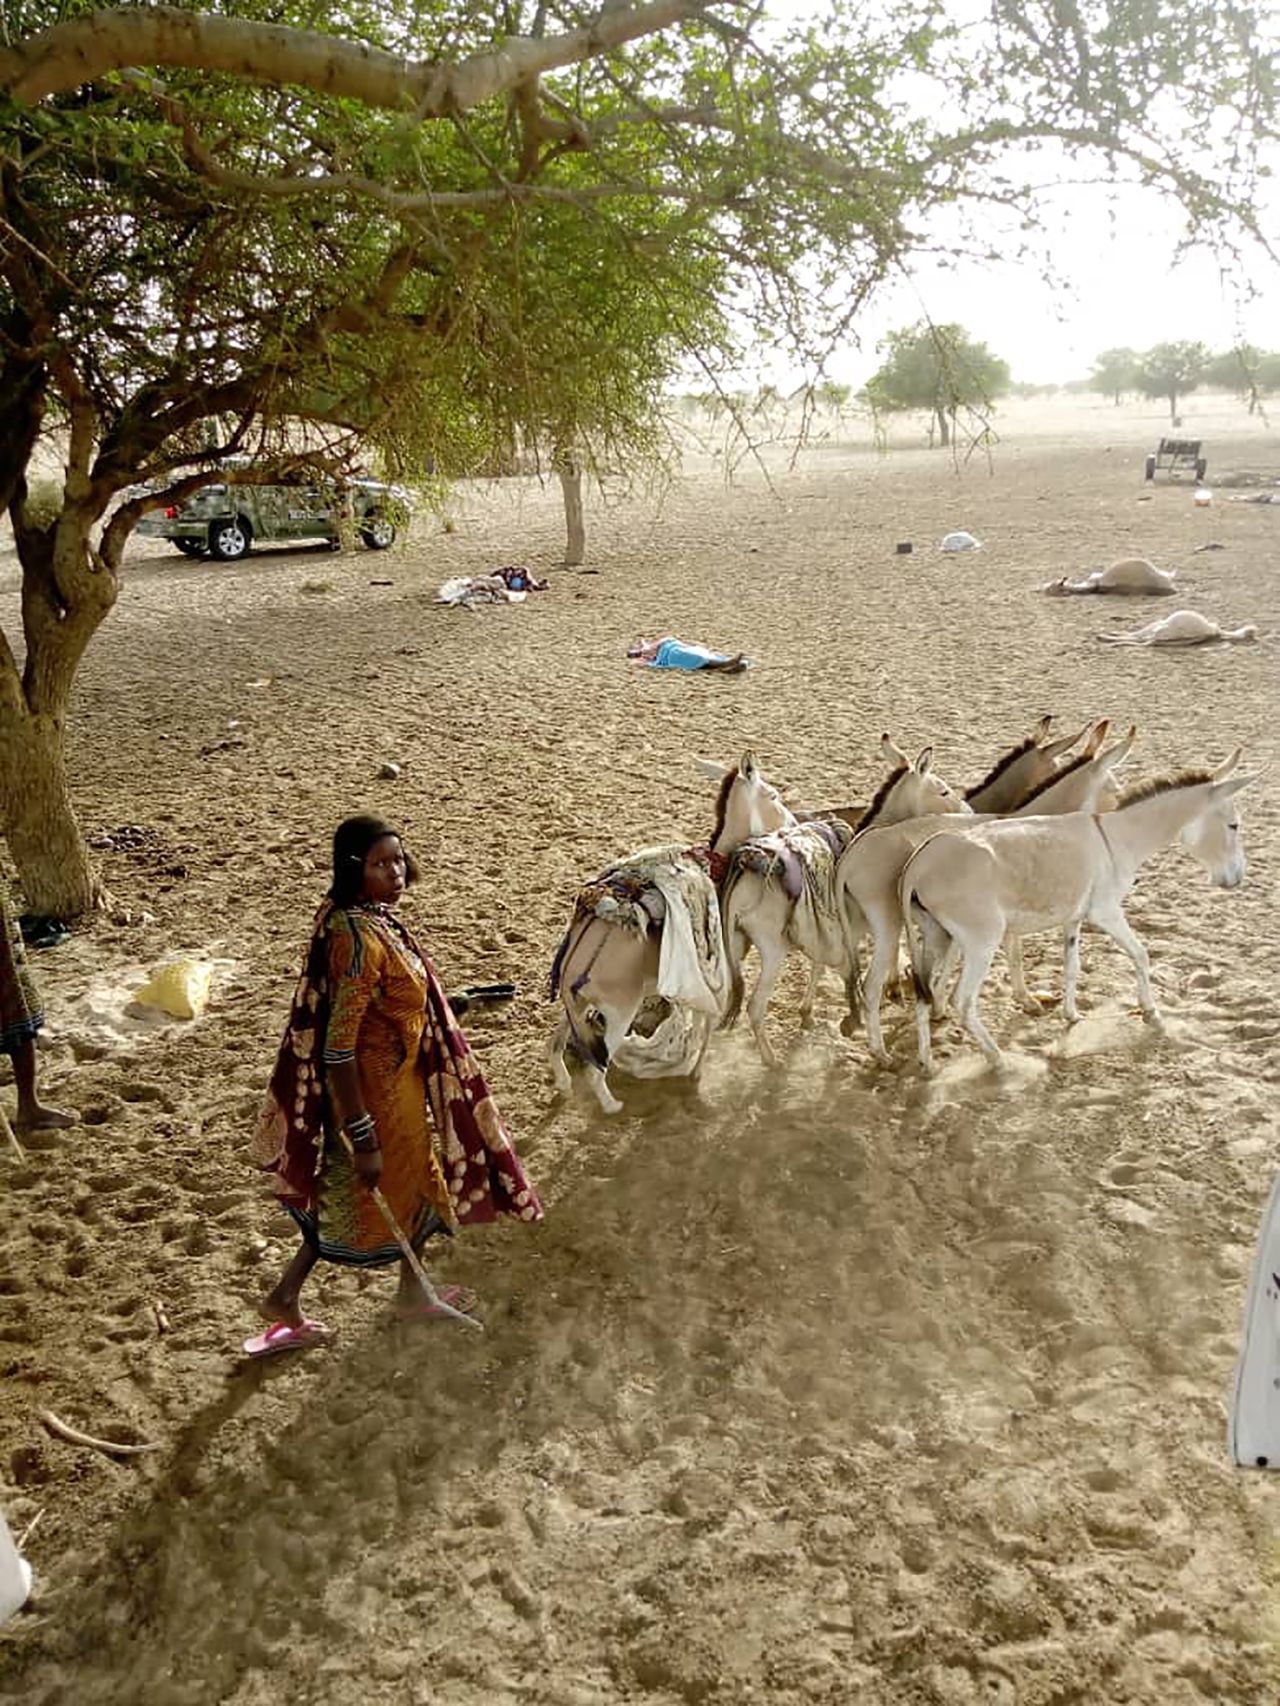 A woman tends to animals in the Nigerian village of Faduma on Wednesday, June 10. At least 81 people there were killed Tuesday <a href="https://www.cnn.com/2020/06/10/africa/boko-haram-faduma-attack/index.html" target="_blank">in an attack by suspected Boko Haram militants,</a> the Borno state government said in a statement released to CNN.